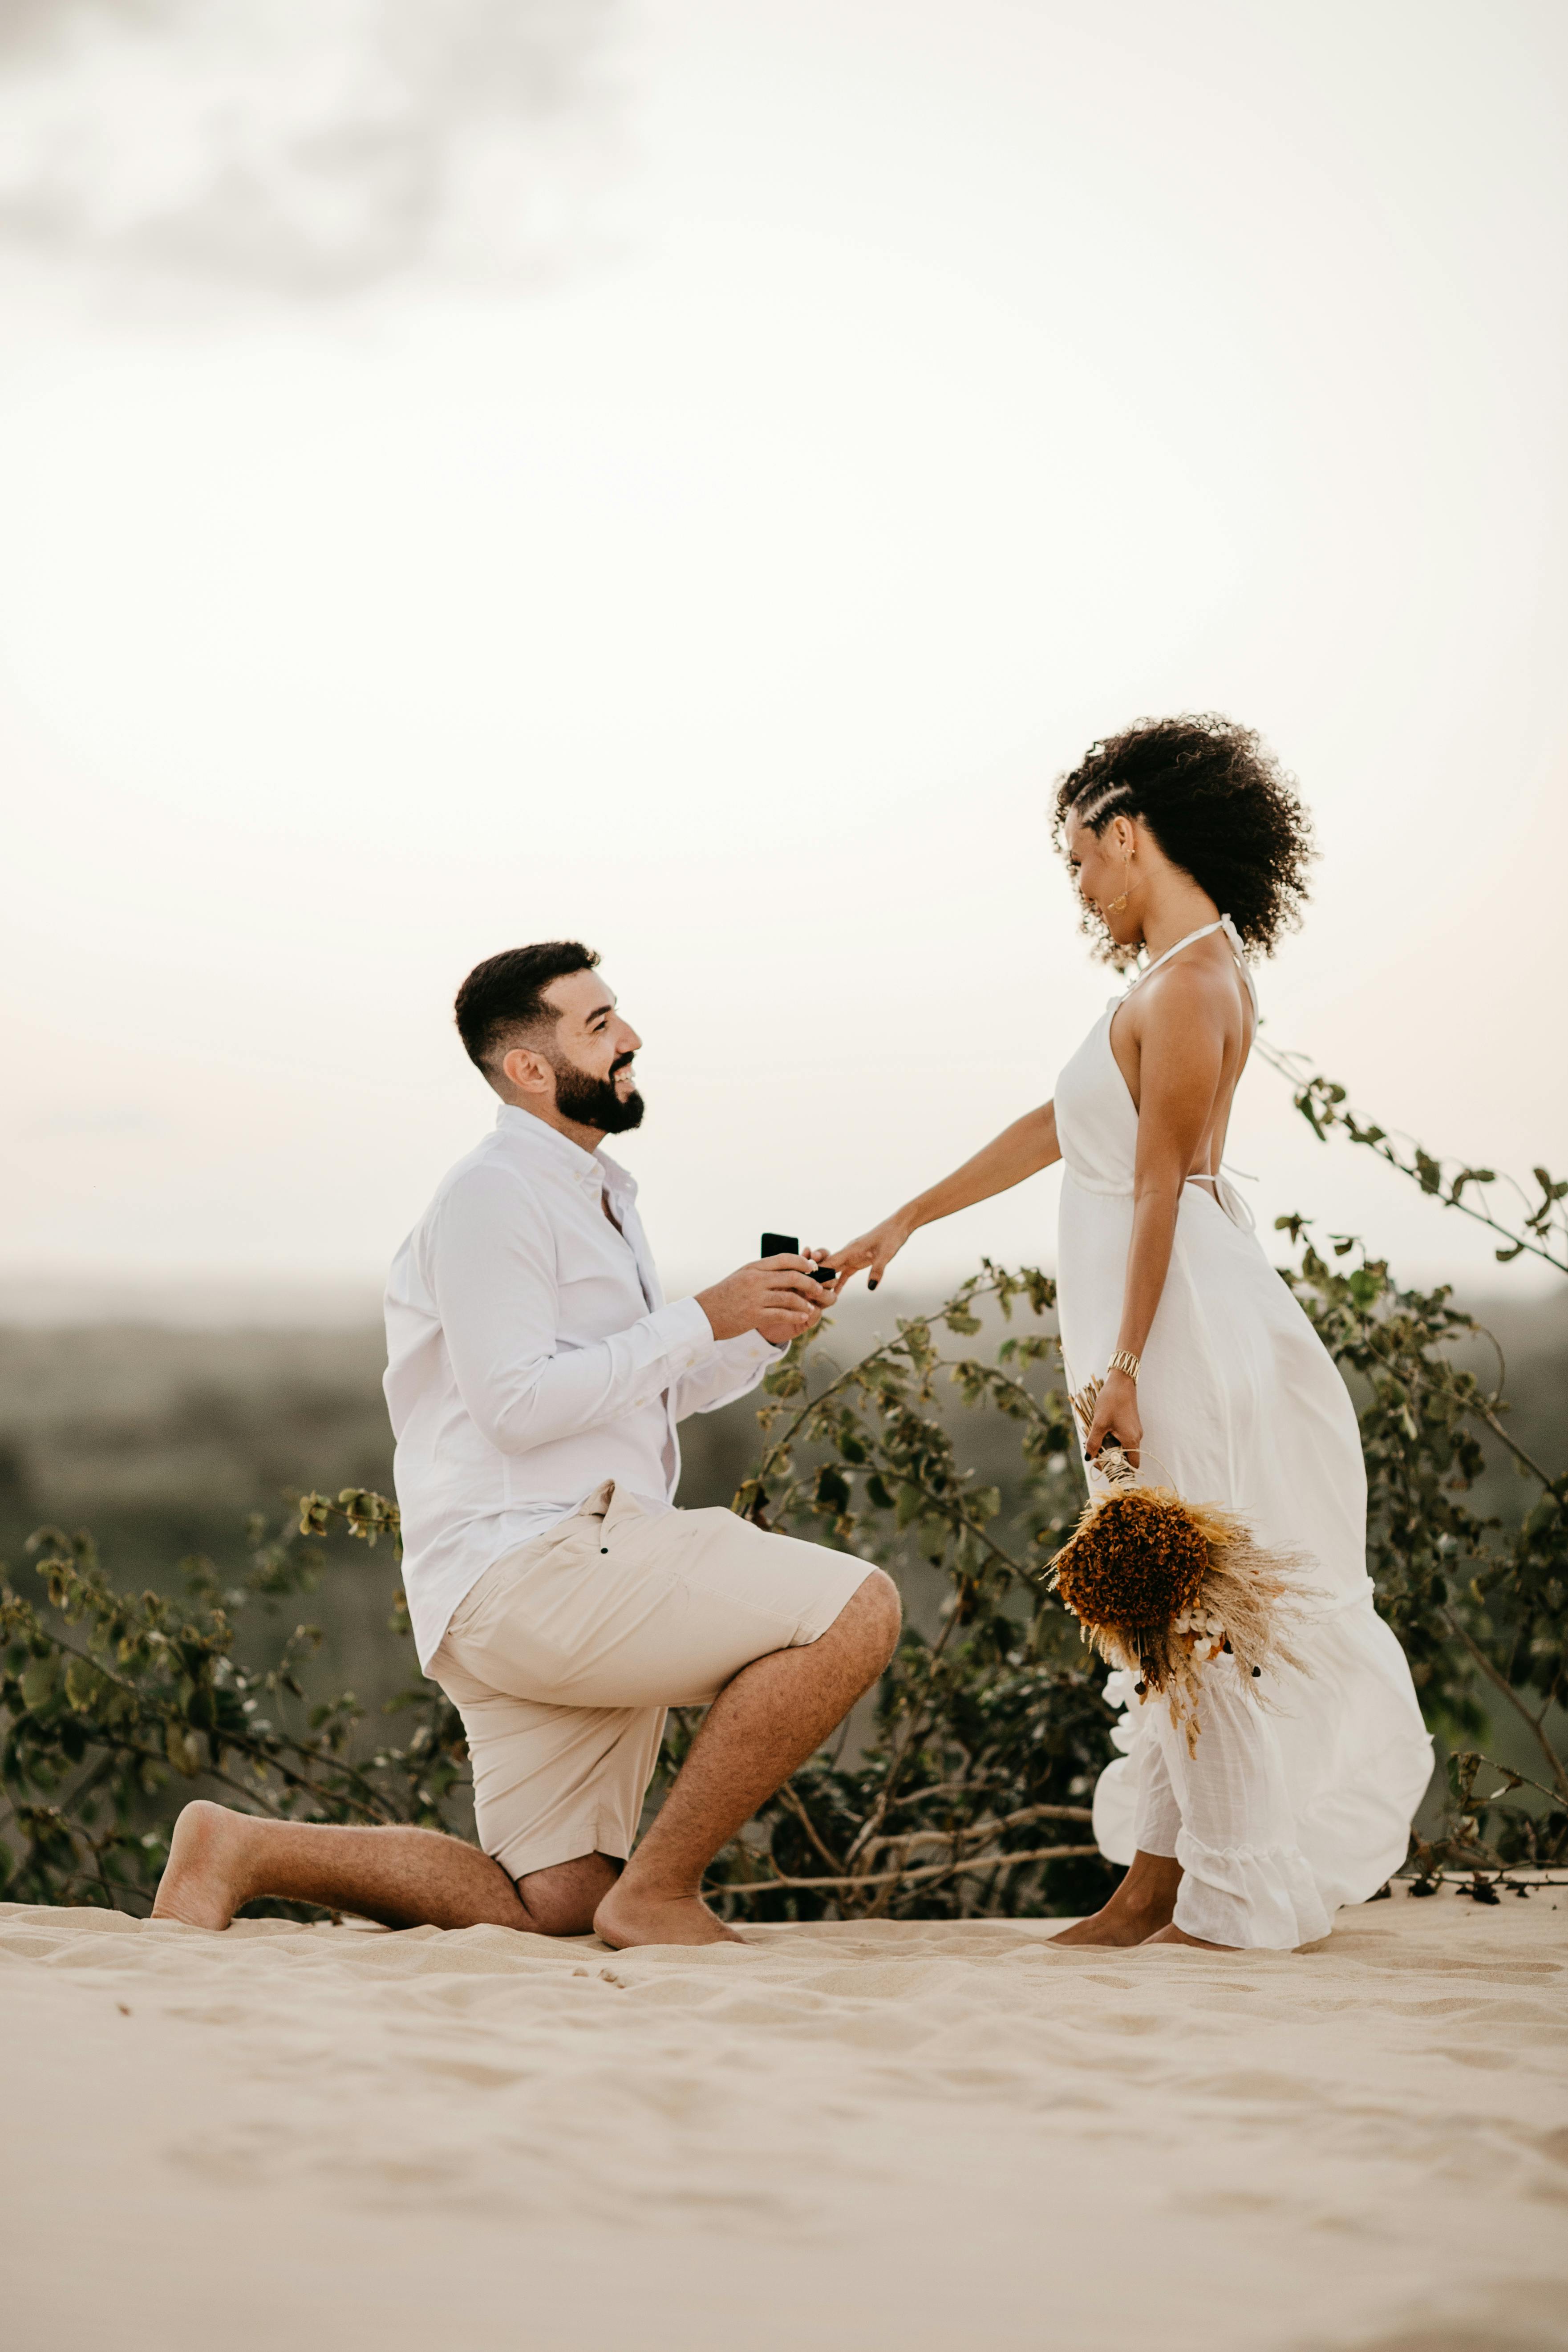 A man proposing to his girlfriend at the beach | Source: Pexels